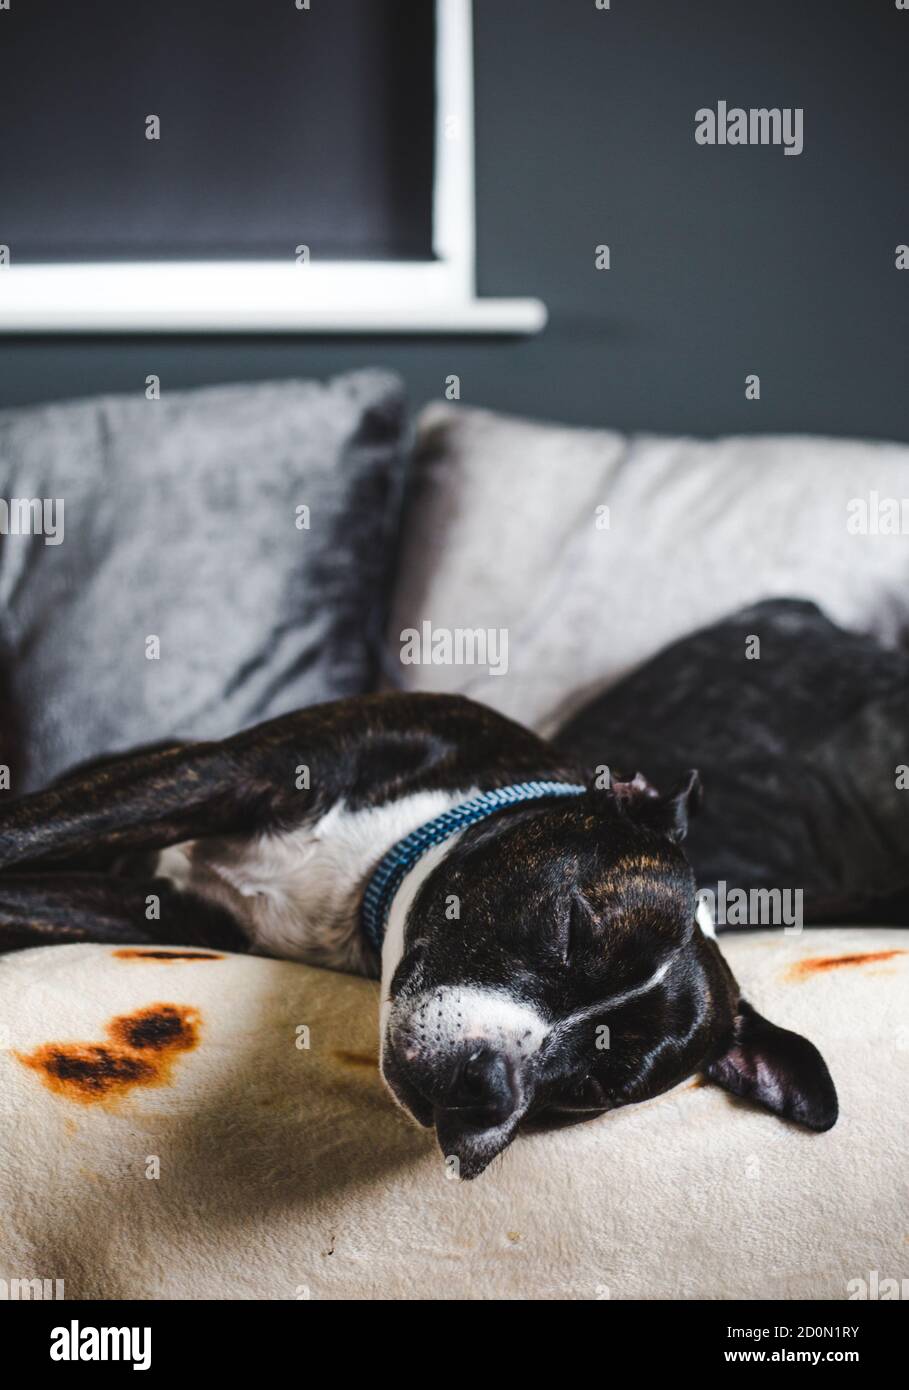 Stretched-out adopted brown brindle Staffordshire bull terrier dog with white face markings napping comfortably on the sofa Stock Photo